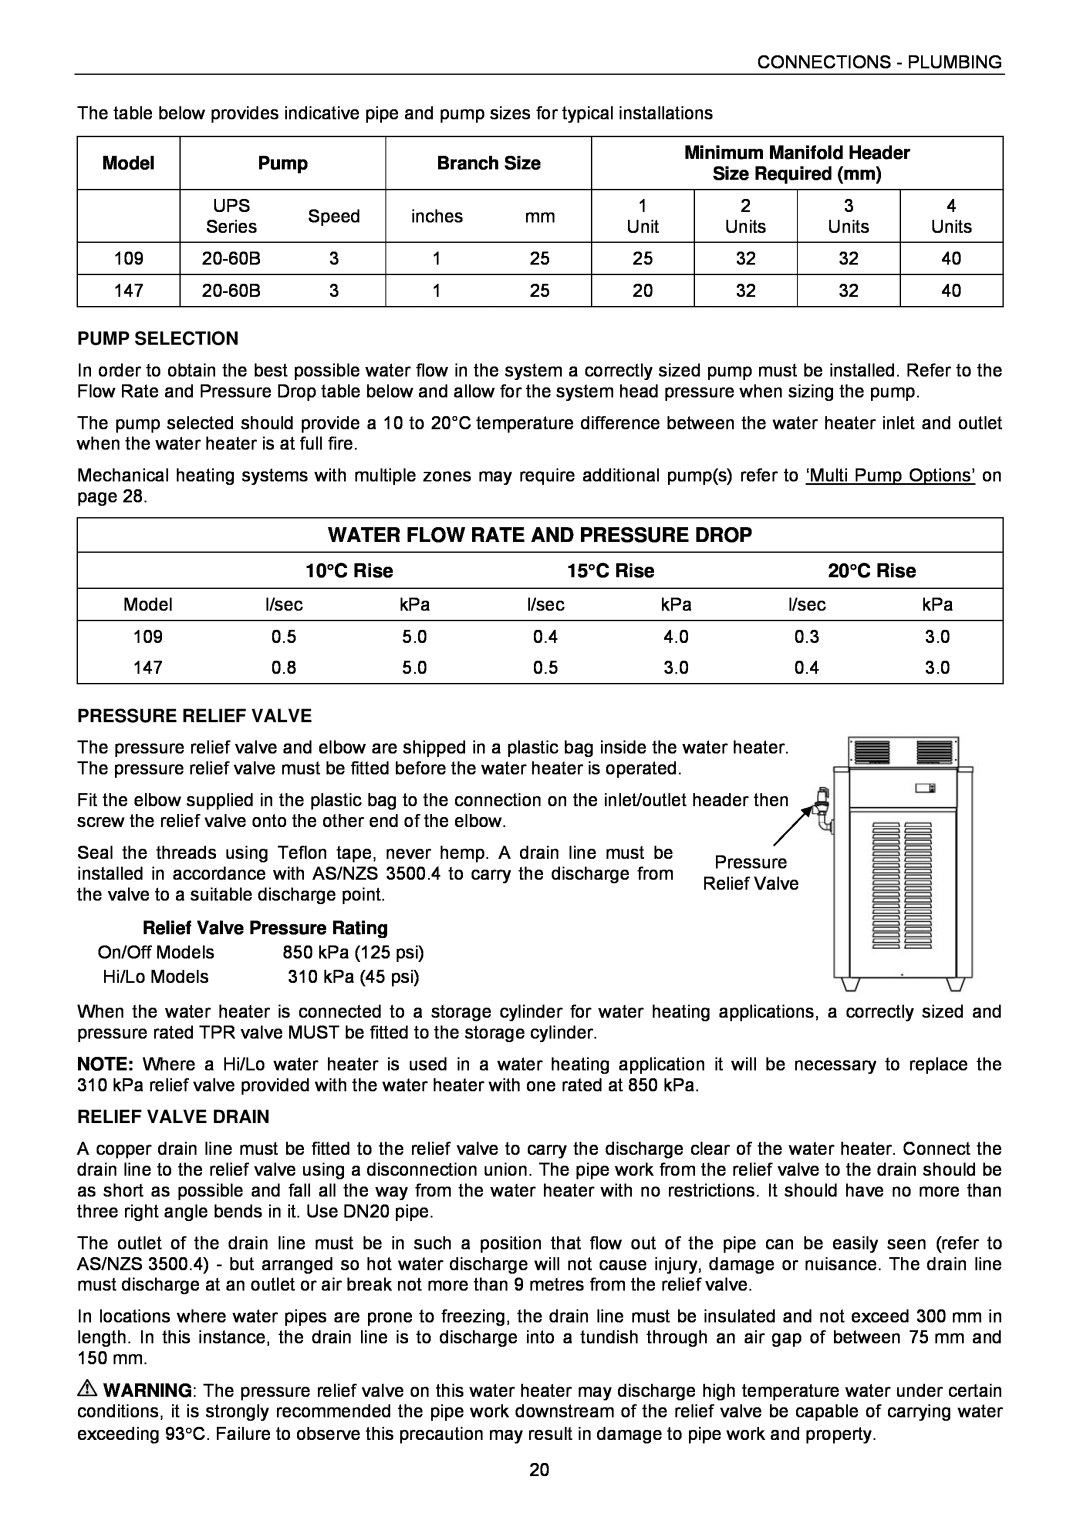 Raypak B0147 Water Flow Rate And Pressure Drop, 10C Rise, 15C Rise, 20C Rise, Model, Branch Size, Pump Selection 